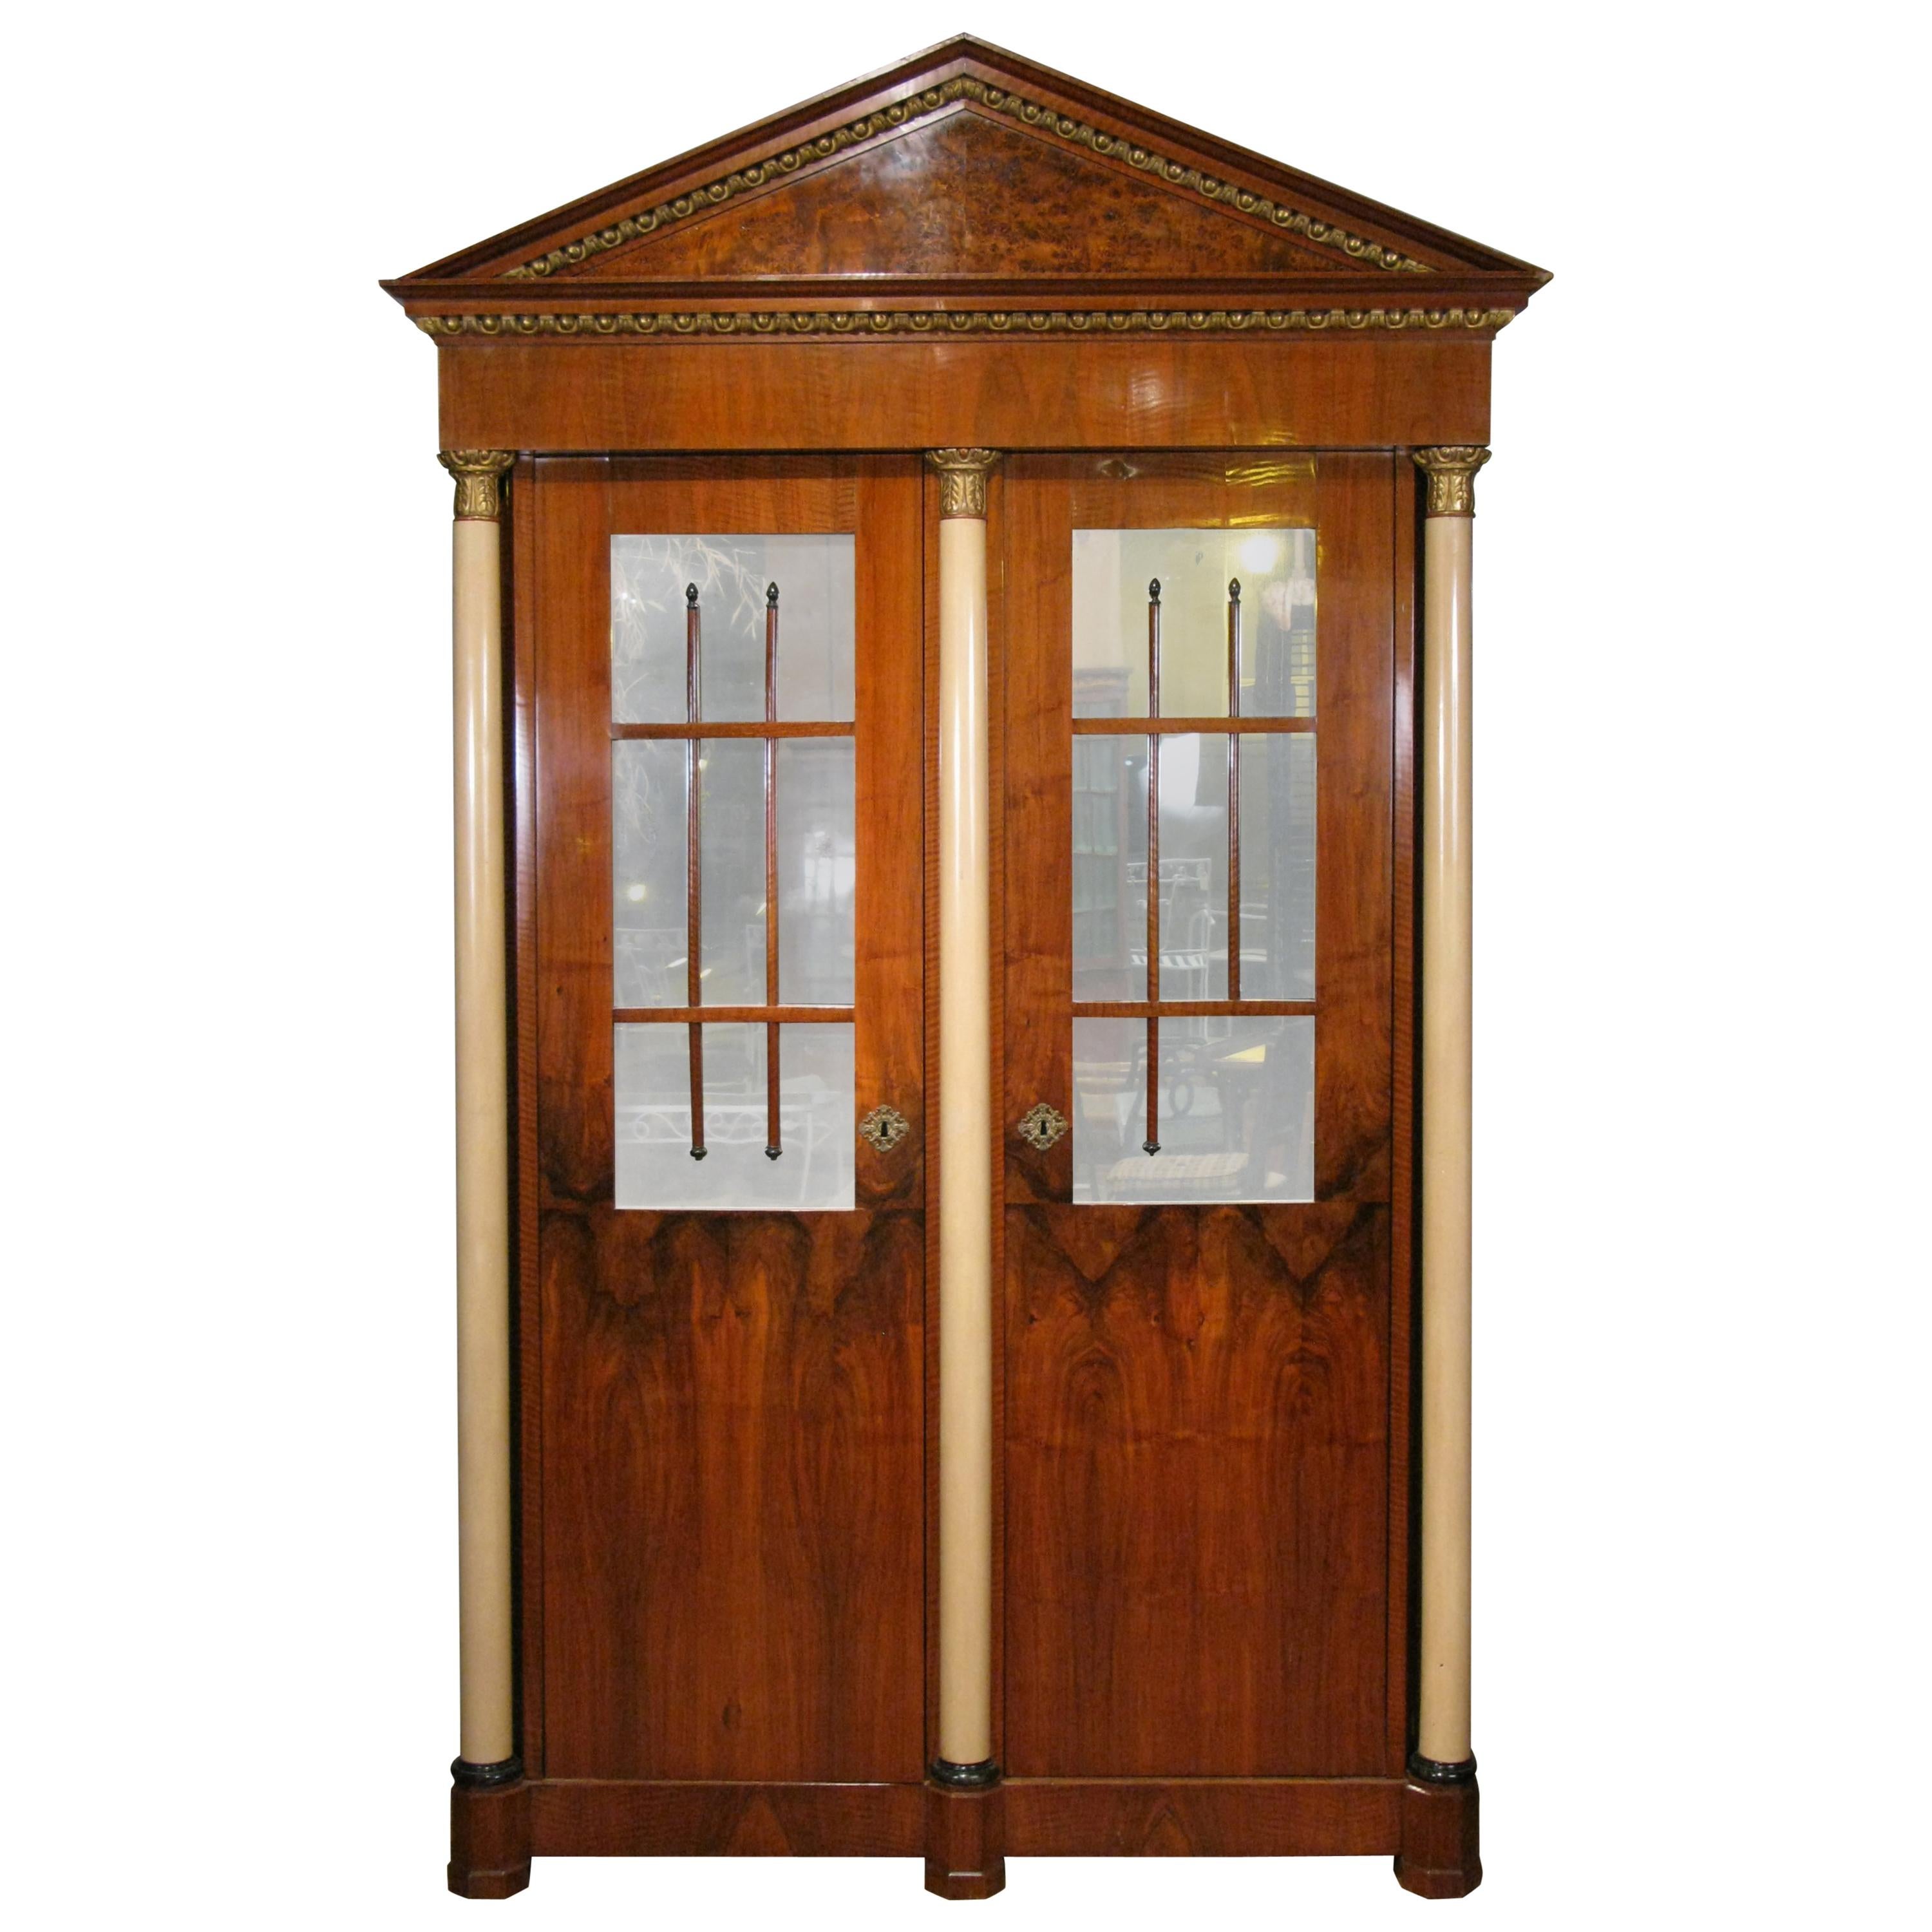 Antique 19th Century Biedermeier Cabinet with Fitted Interior